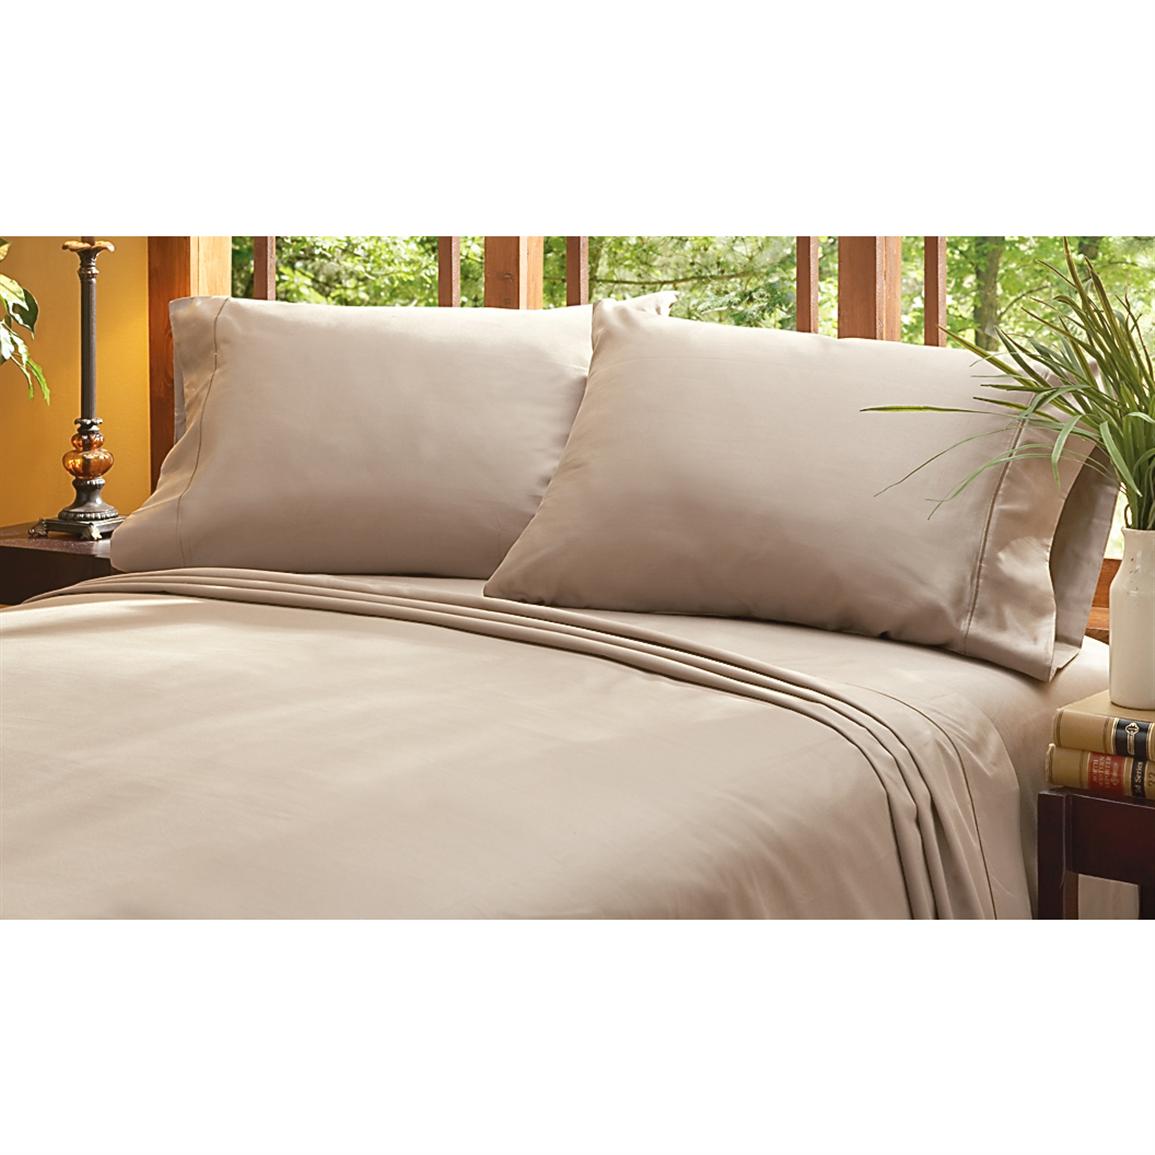 Single Ply 600 Thread Count Egyptian Cotton Sheet Set 180393 Sheets At Sportsmans Guide